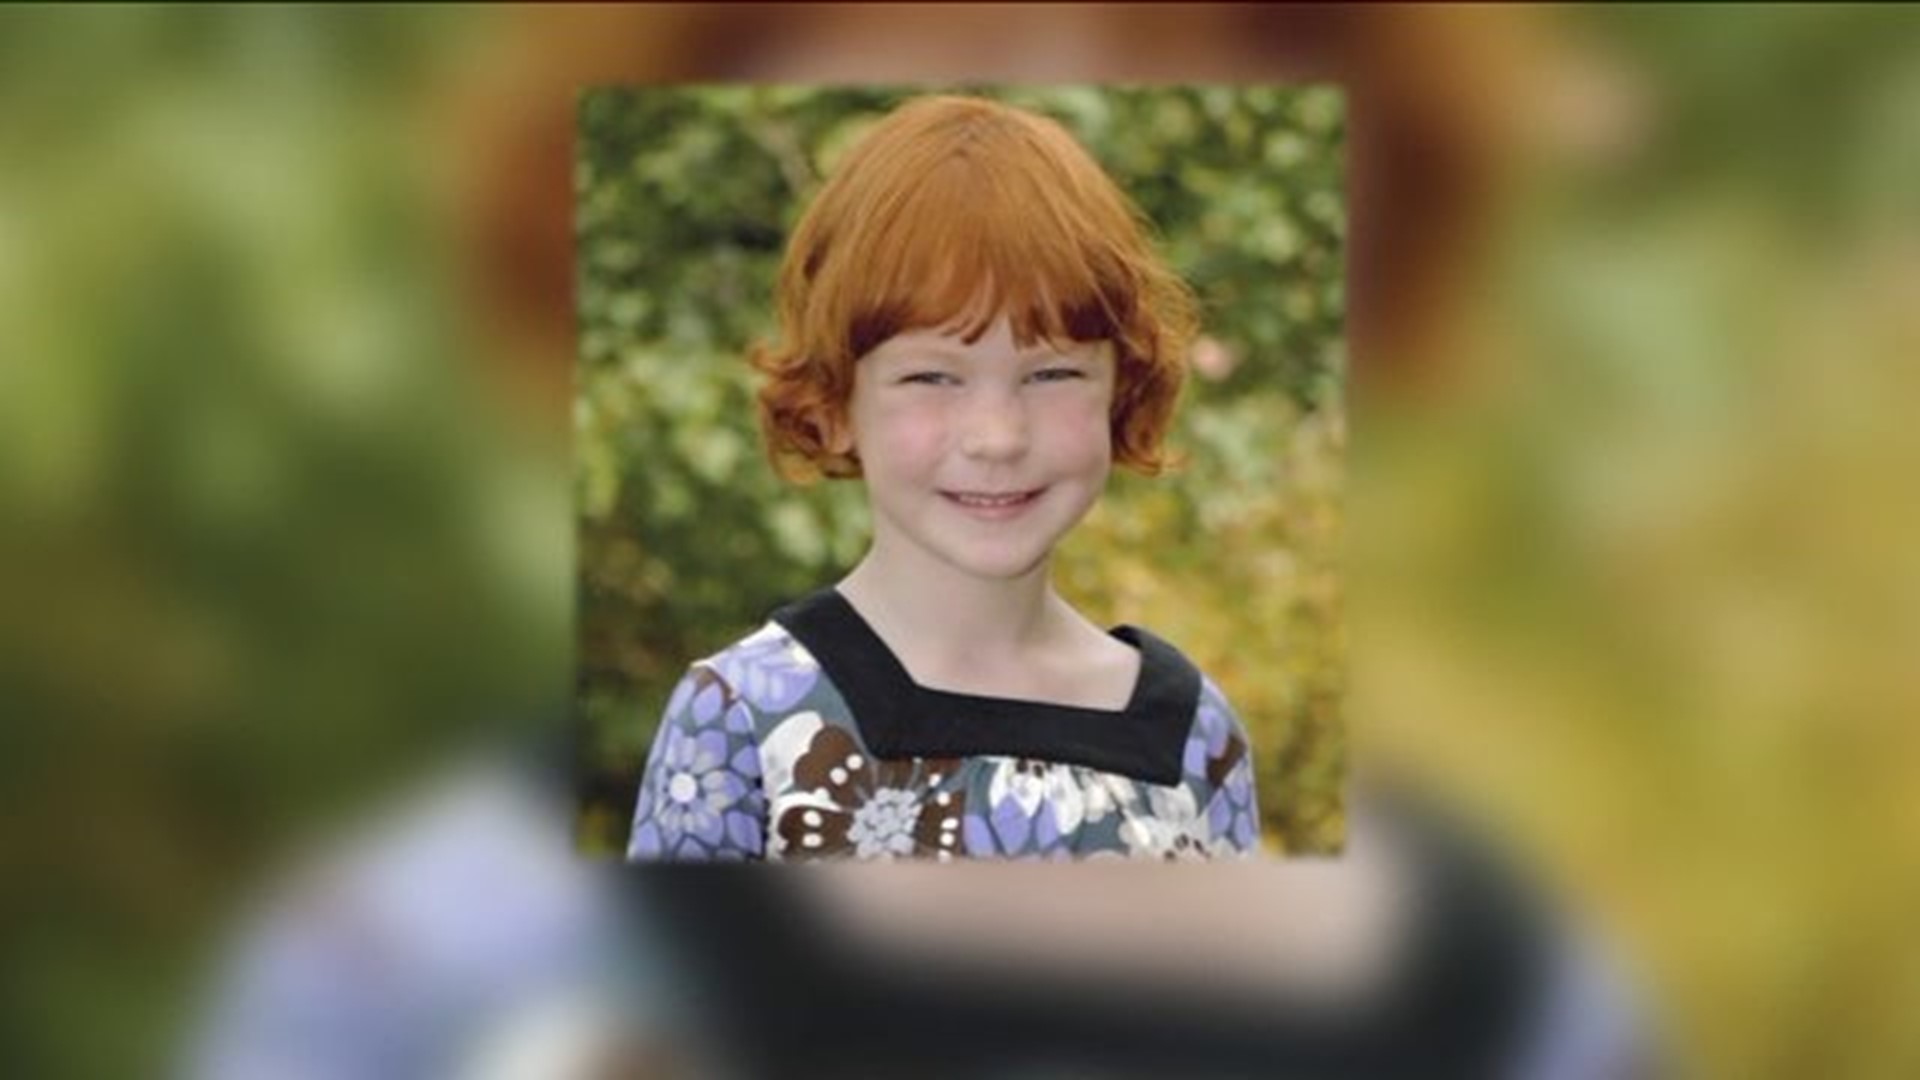 State Donates Land For Animal Sanctuary To Honor Sandy Hook Victim